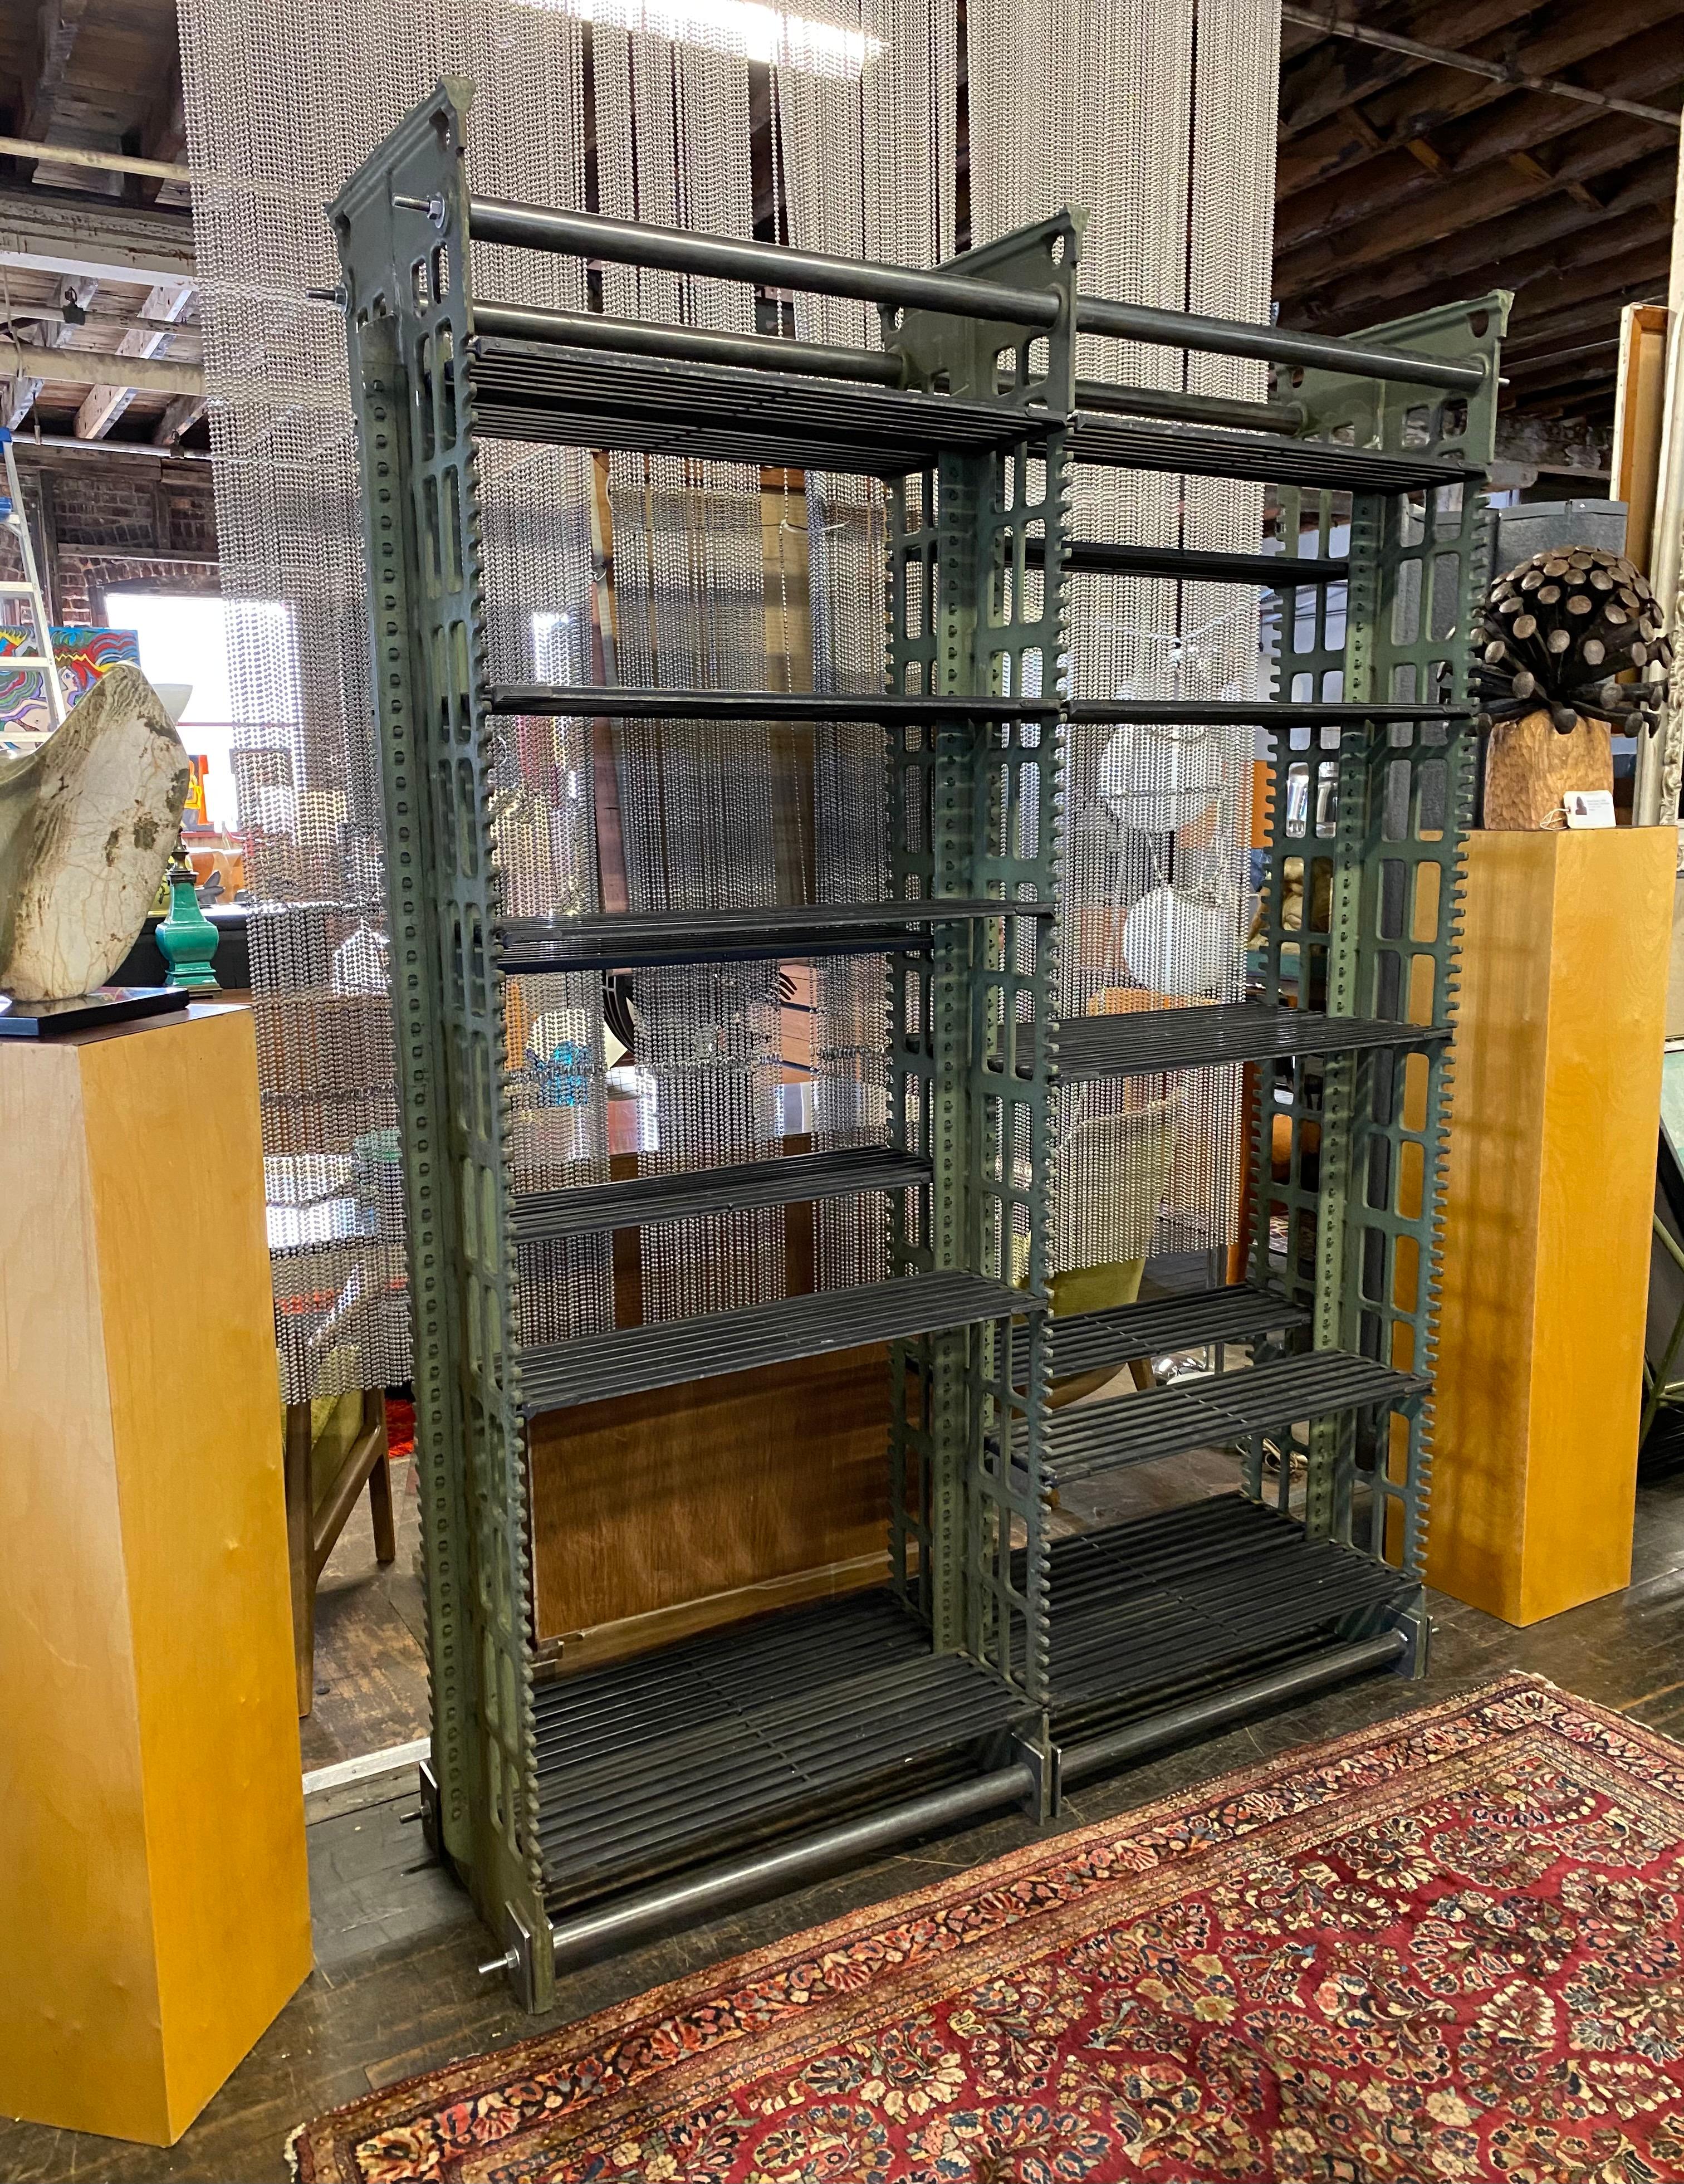 A rare set of antique cast iron archival library bookcases by Snead. these impressive cast iron bookcases with adjustable steel shelves were the standard in the late 19th and early 20th century for library and archival storage, and were used by the